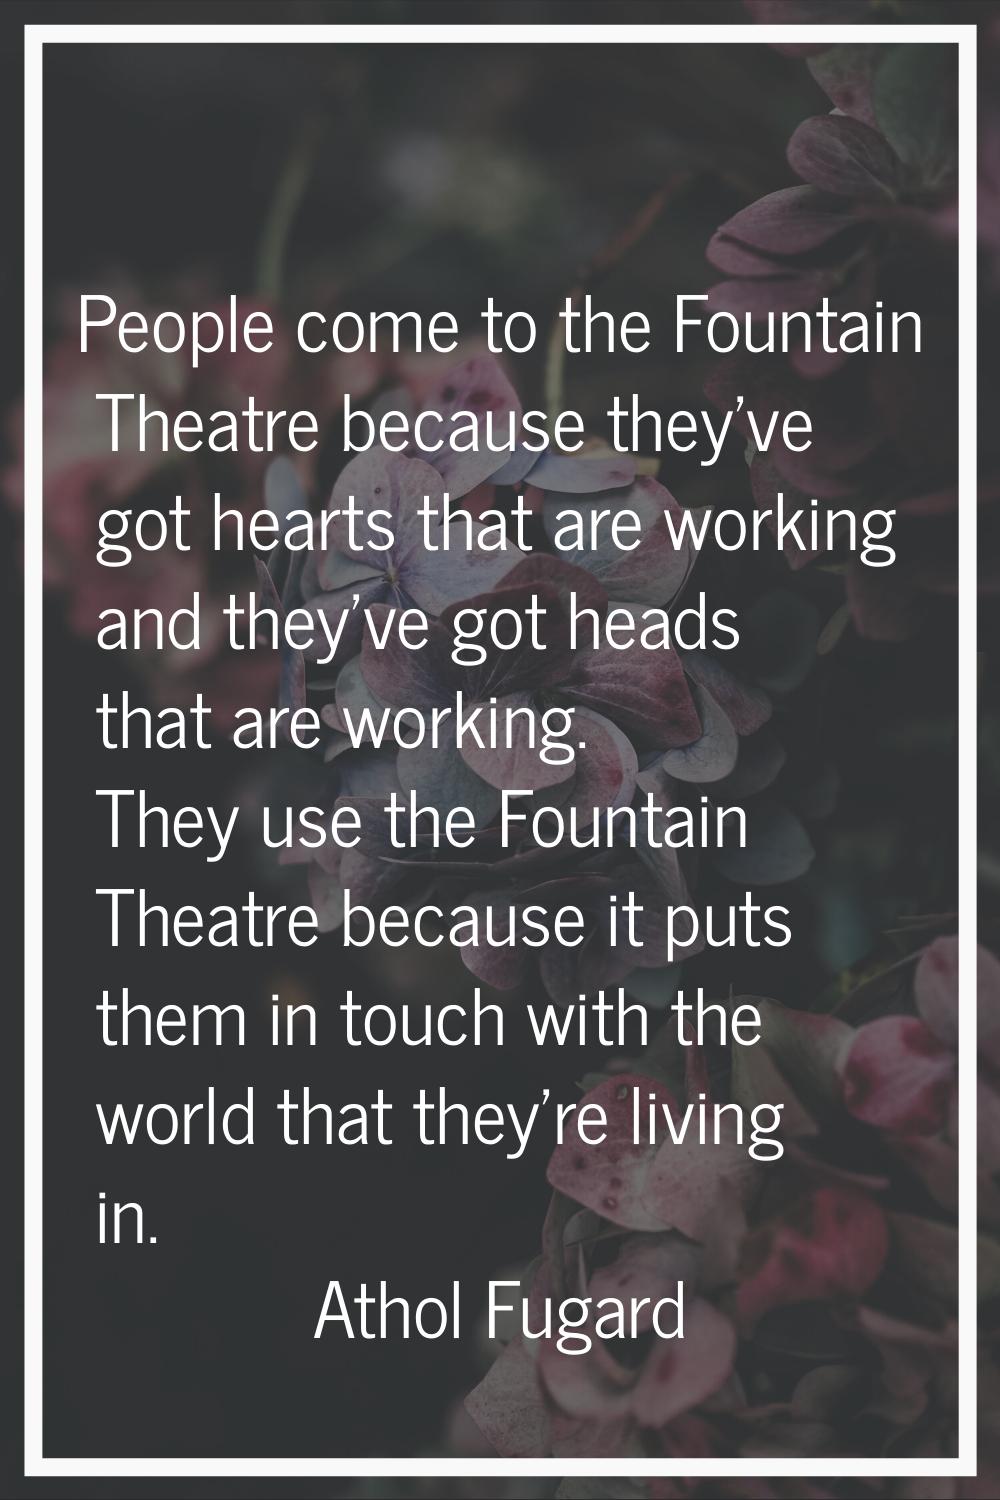 People come to the Fountain Theatre because they've got hearts that are working and they've got hea